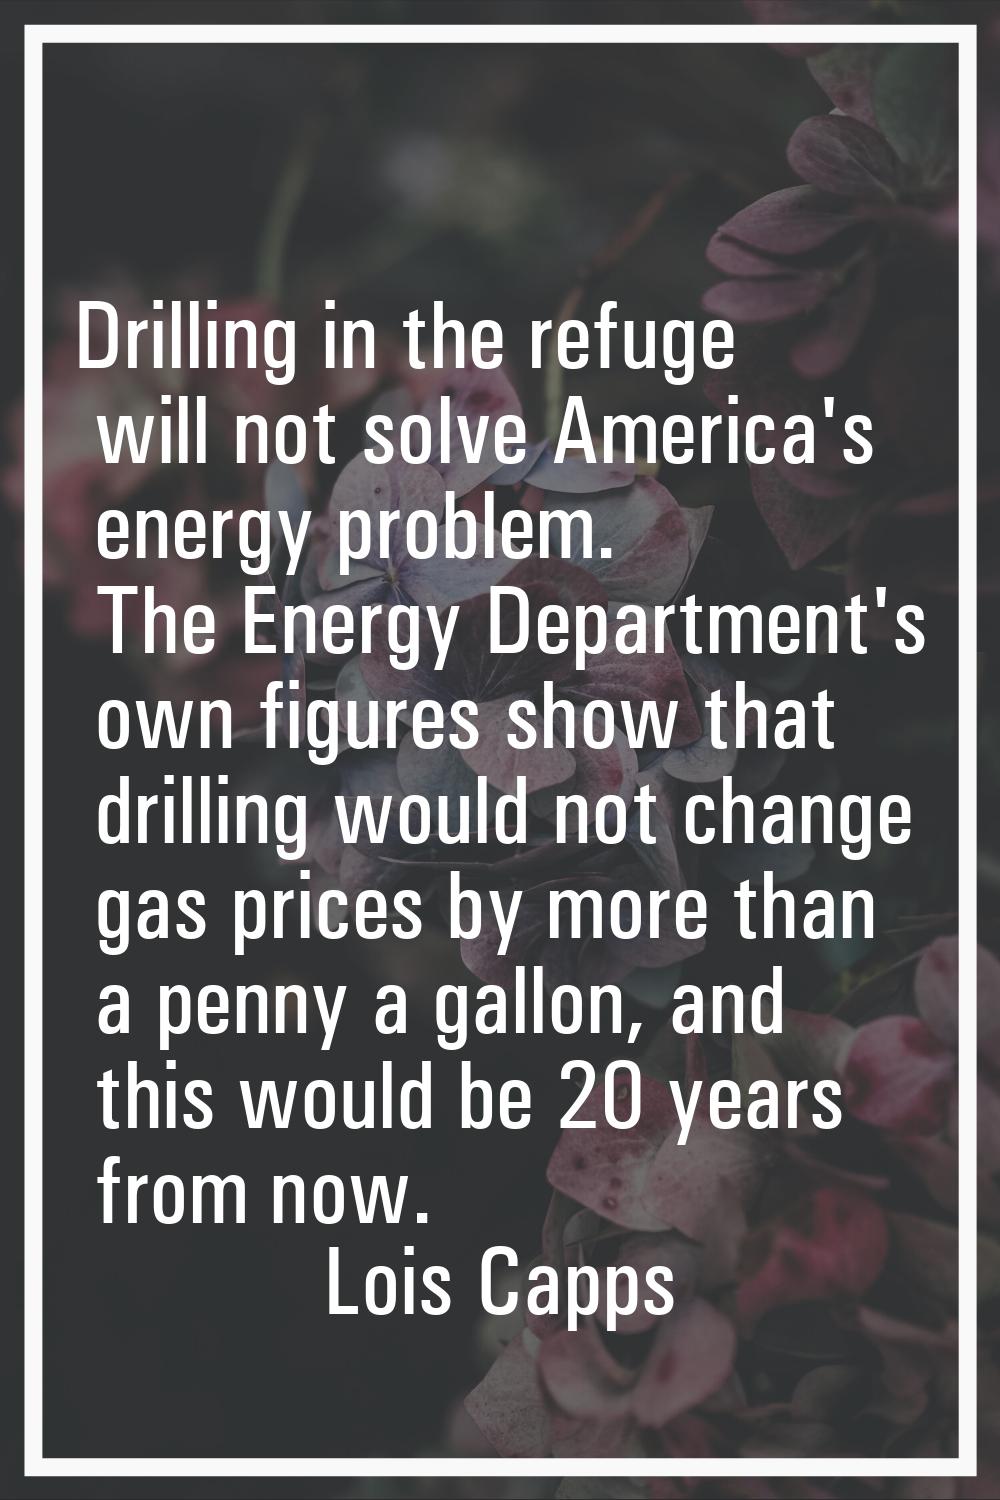 Drilling in the refuge will not solve America's energy problem. The Energy Department's own figures